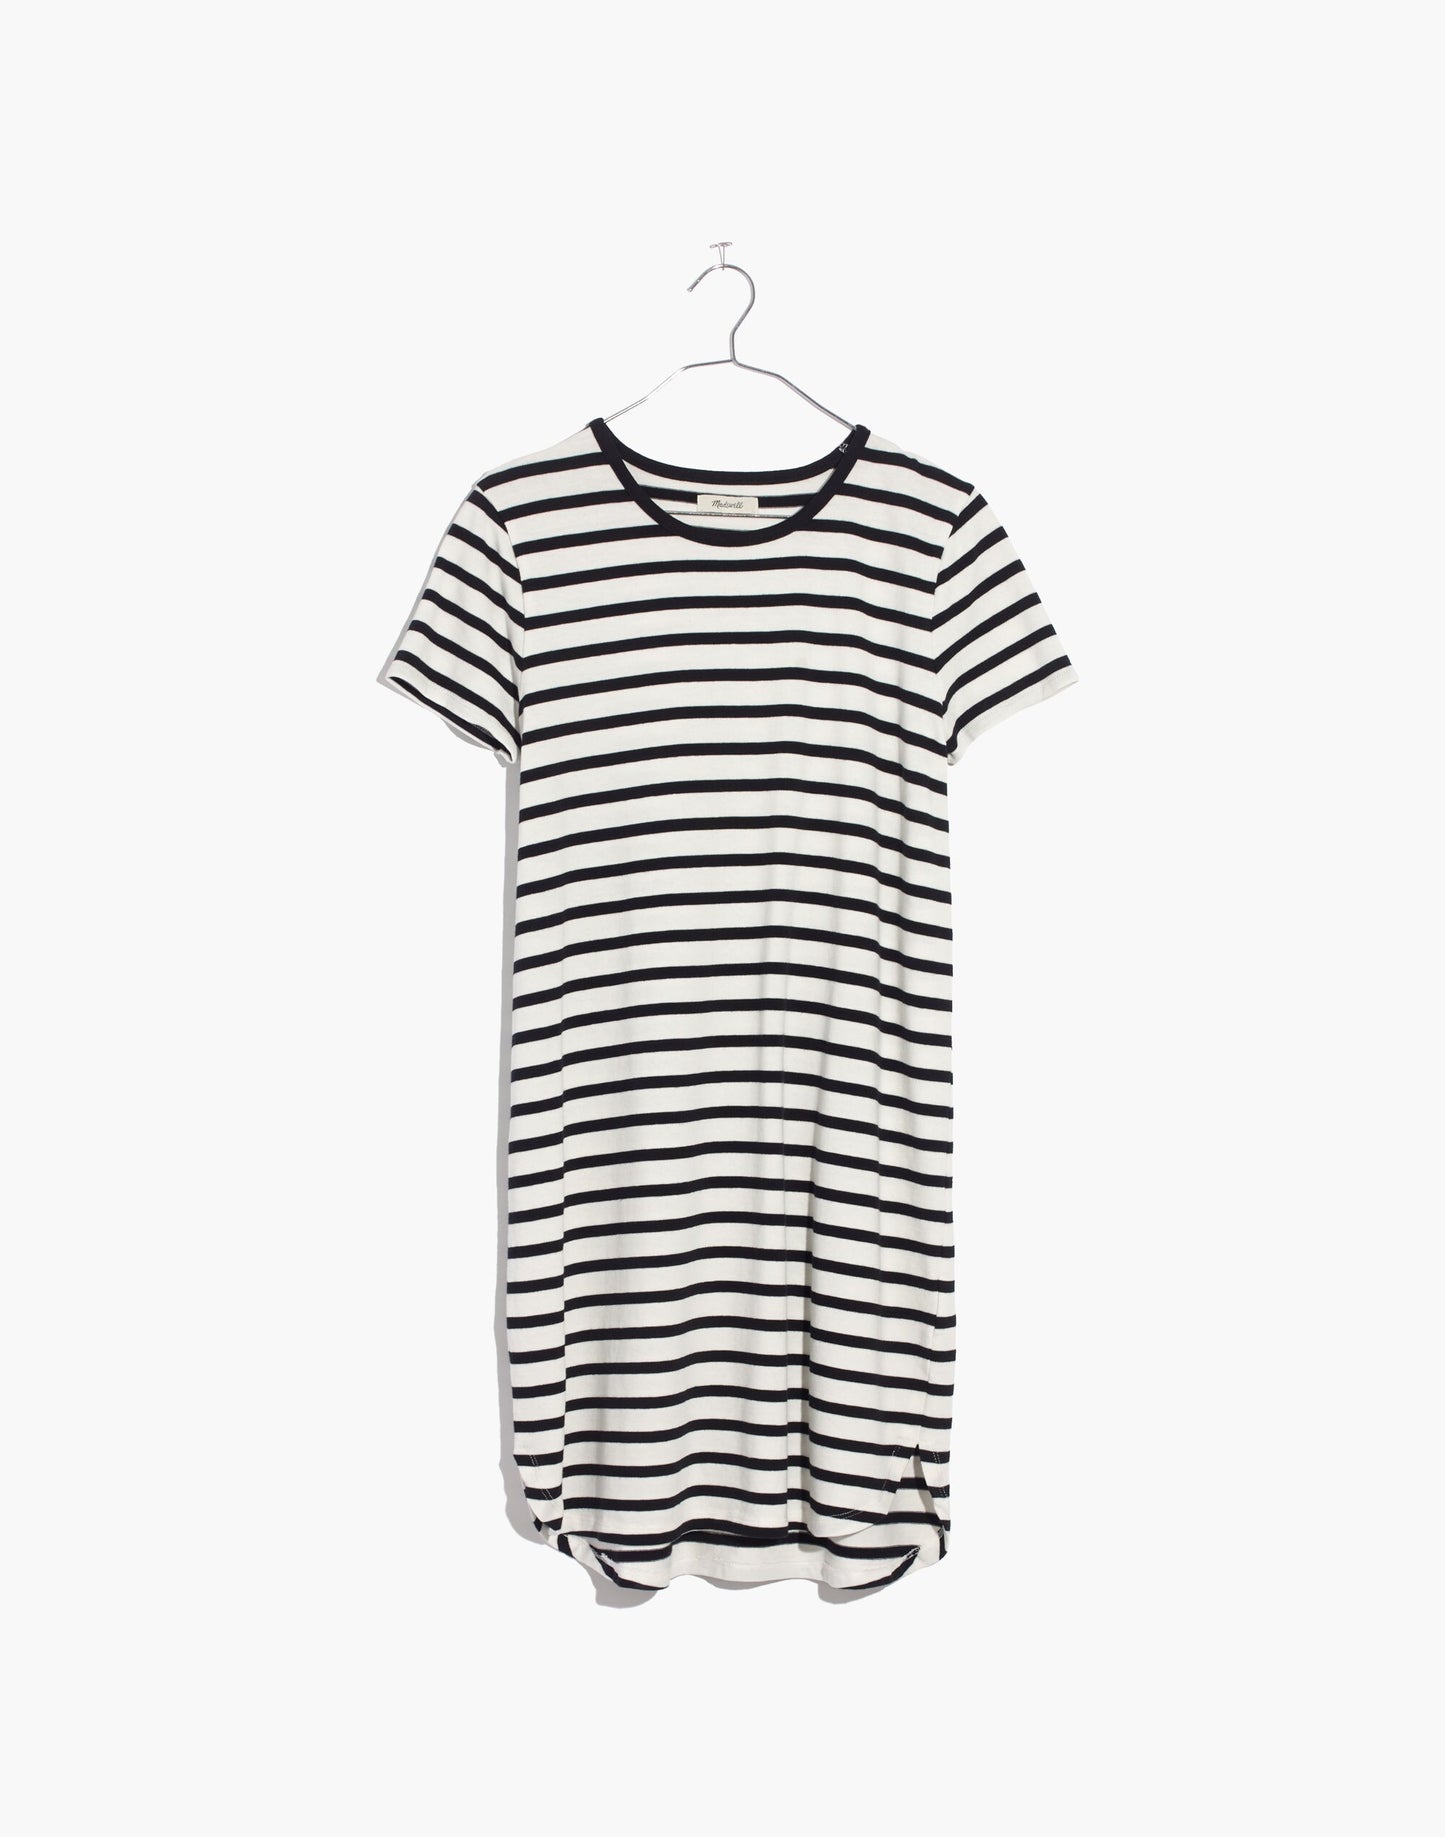 Madewell Striped Ringer Tee Dress in Size L